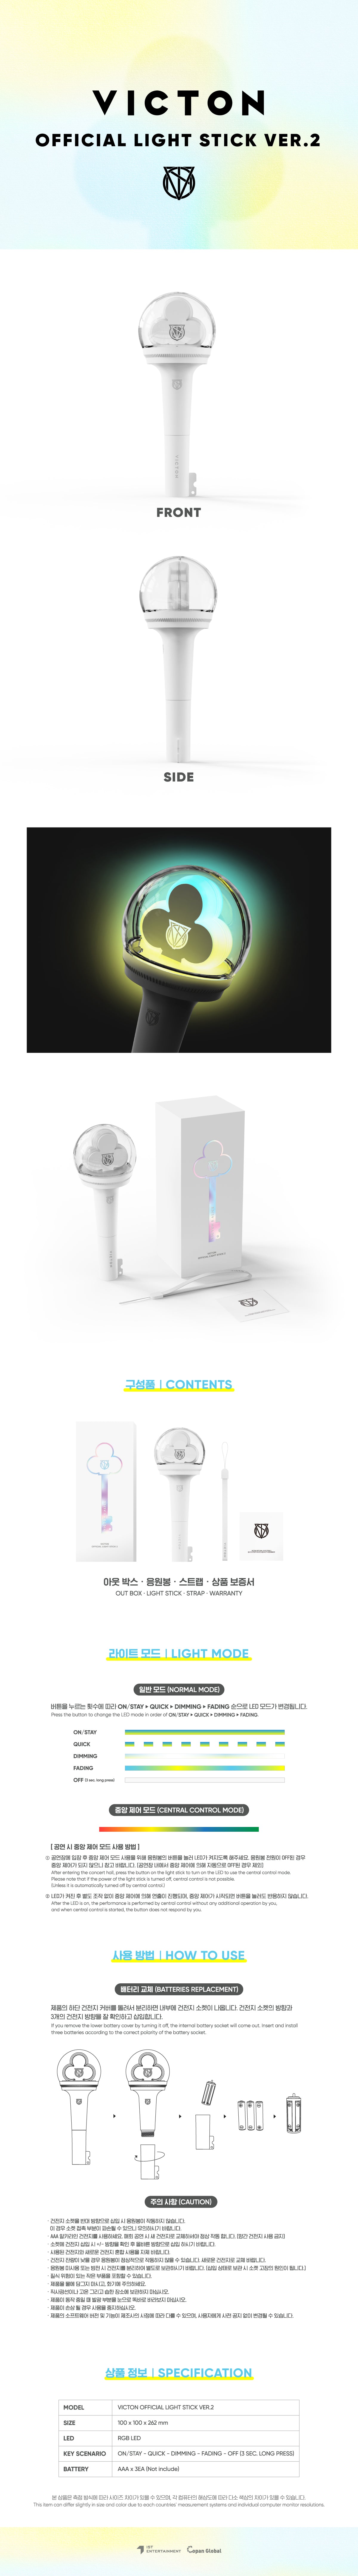 VICTON OFFICIAL LIGHT STICK (VER.2) product detail